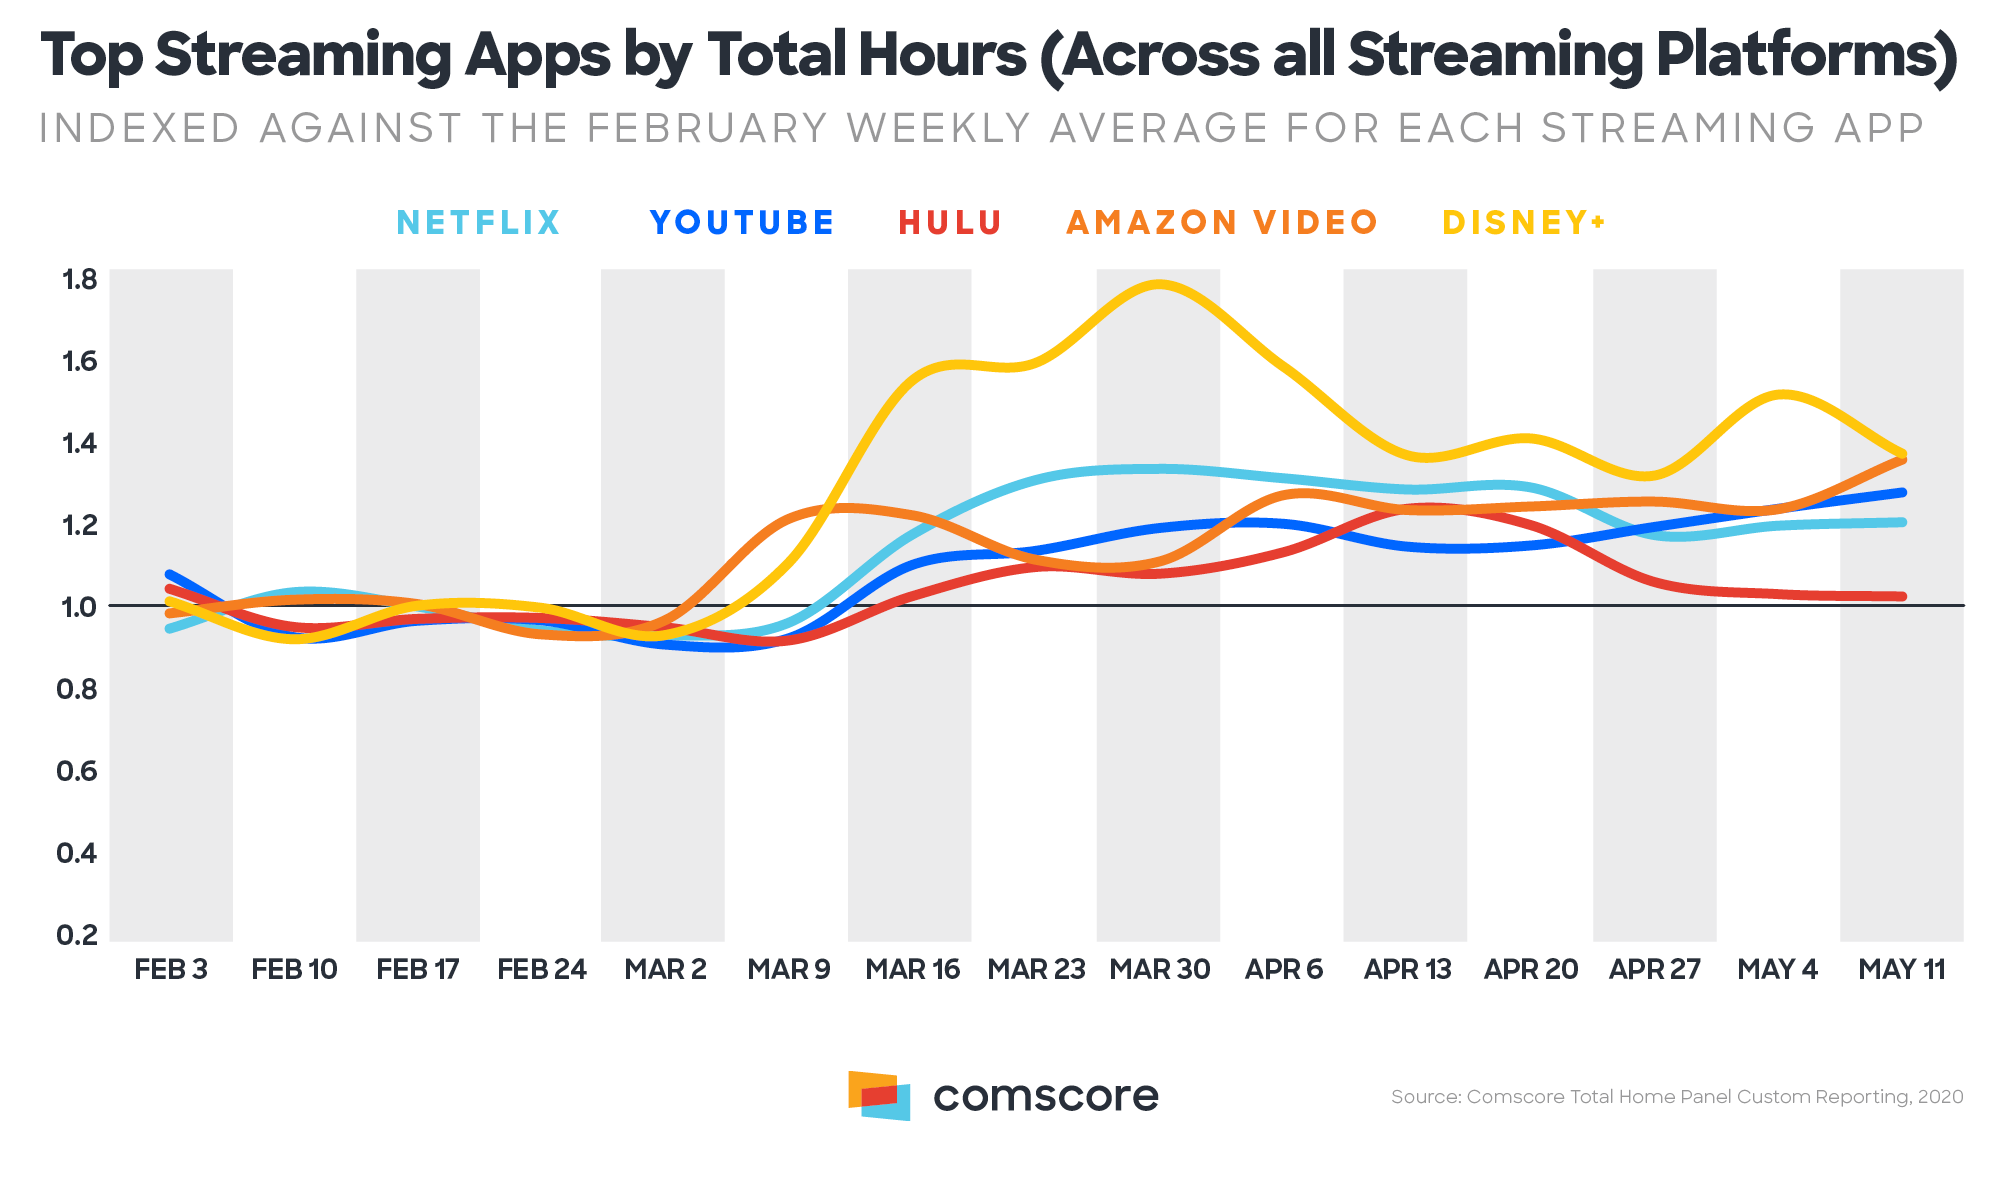 Top Streaming Apps by Total Hours